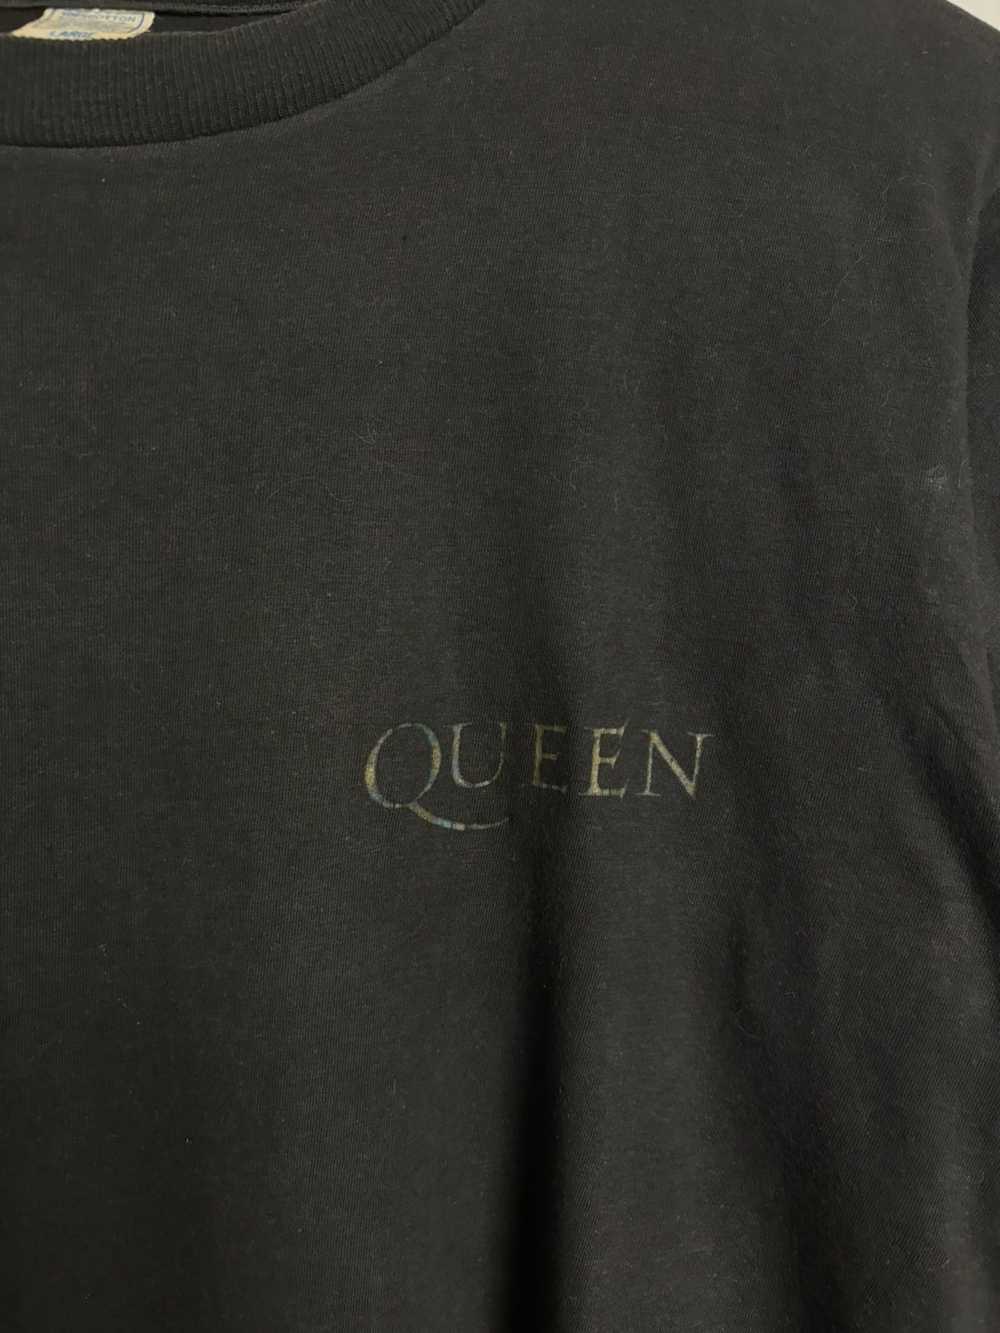 Band Tees × Queen Tour Tee × Rock Tees Vintage 90… - image 4